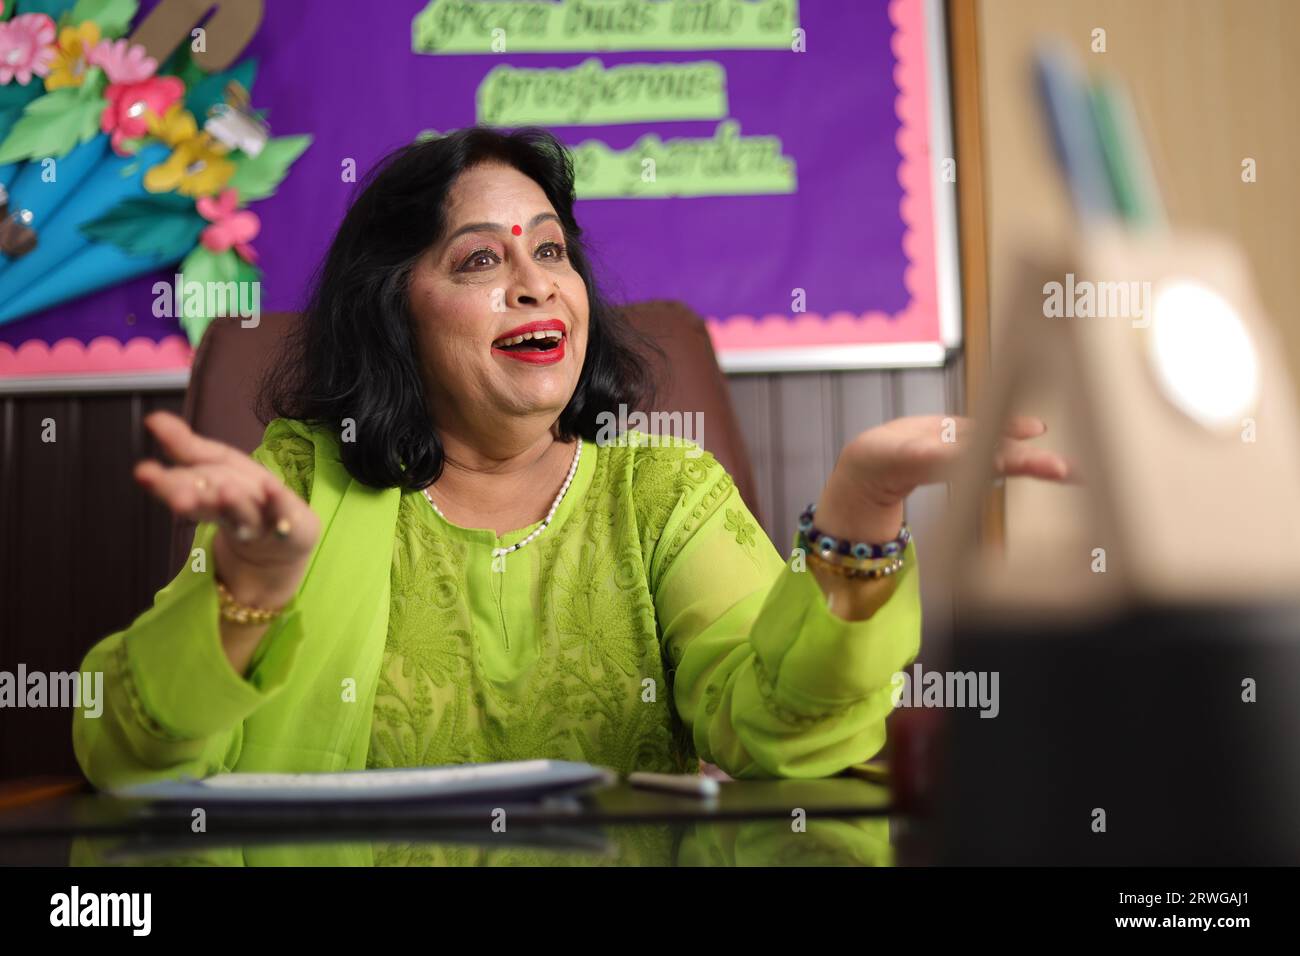 School Principal mam sitting happily, proud of the students of her school, smiling. Stock Photo